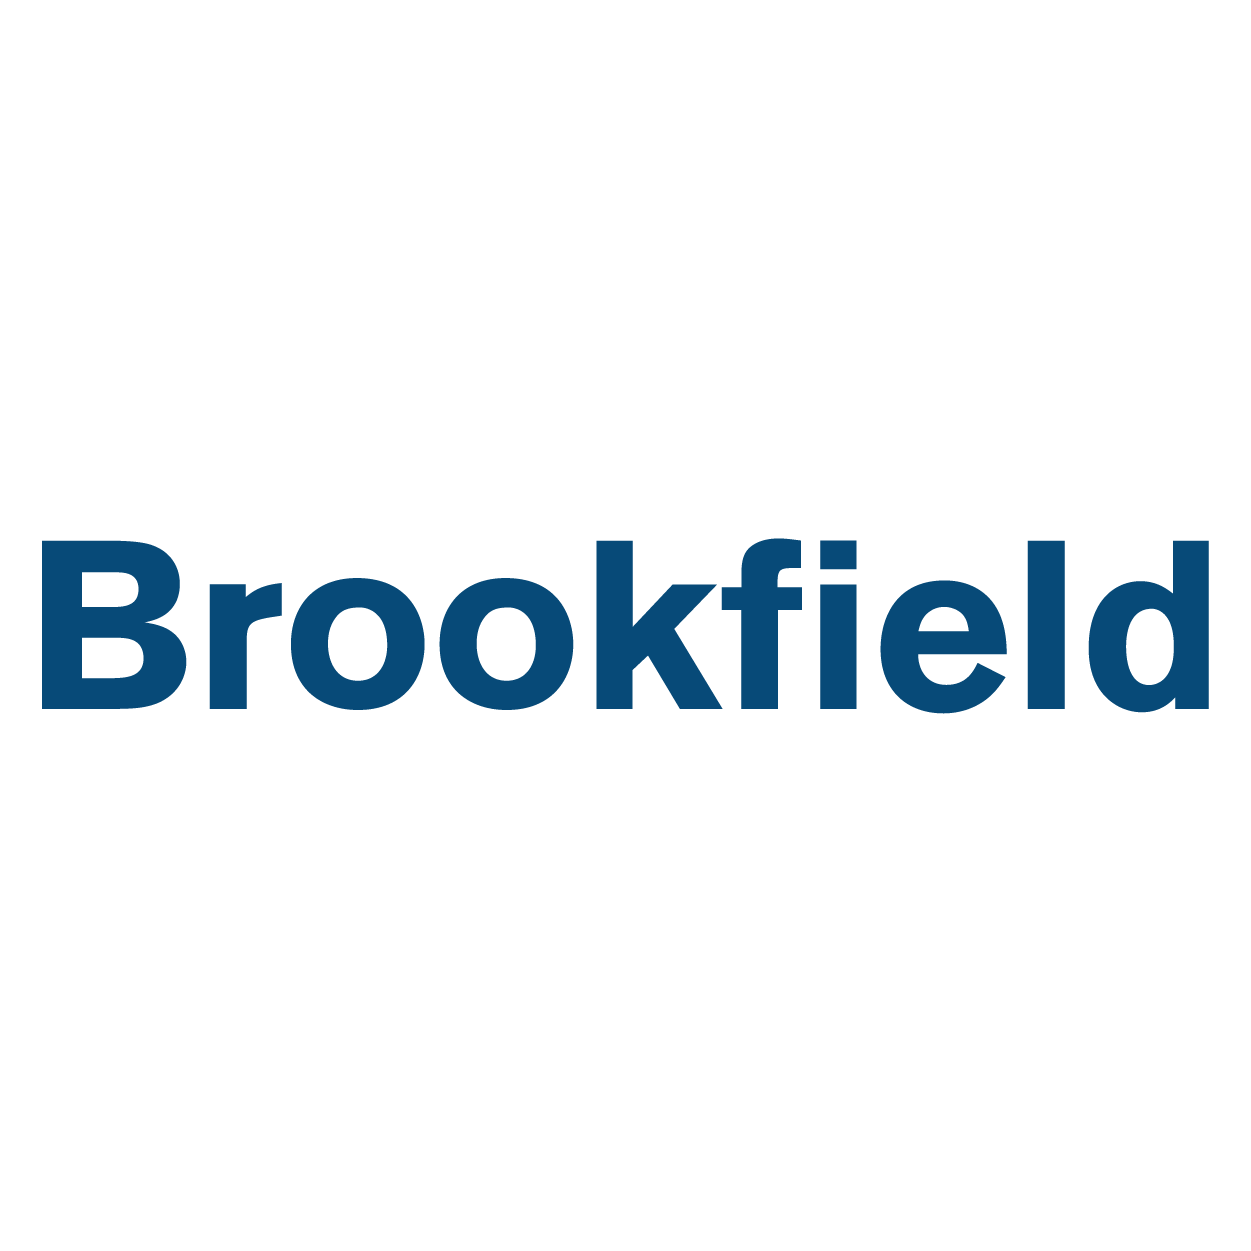 Brookfield Agrees To Sell Florida Resort For $835M: Report